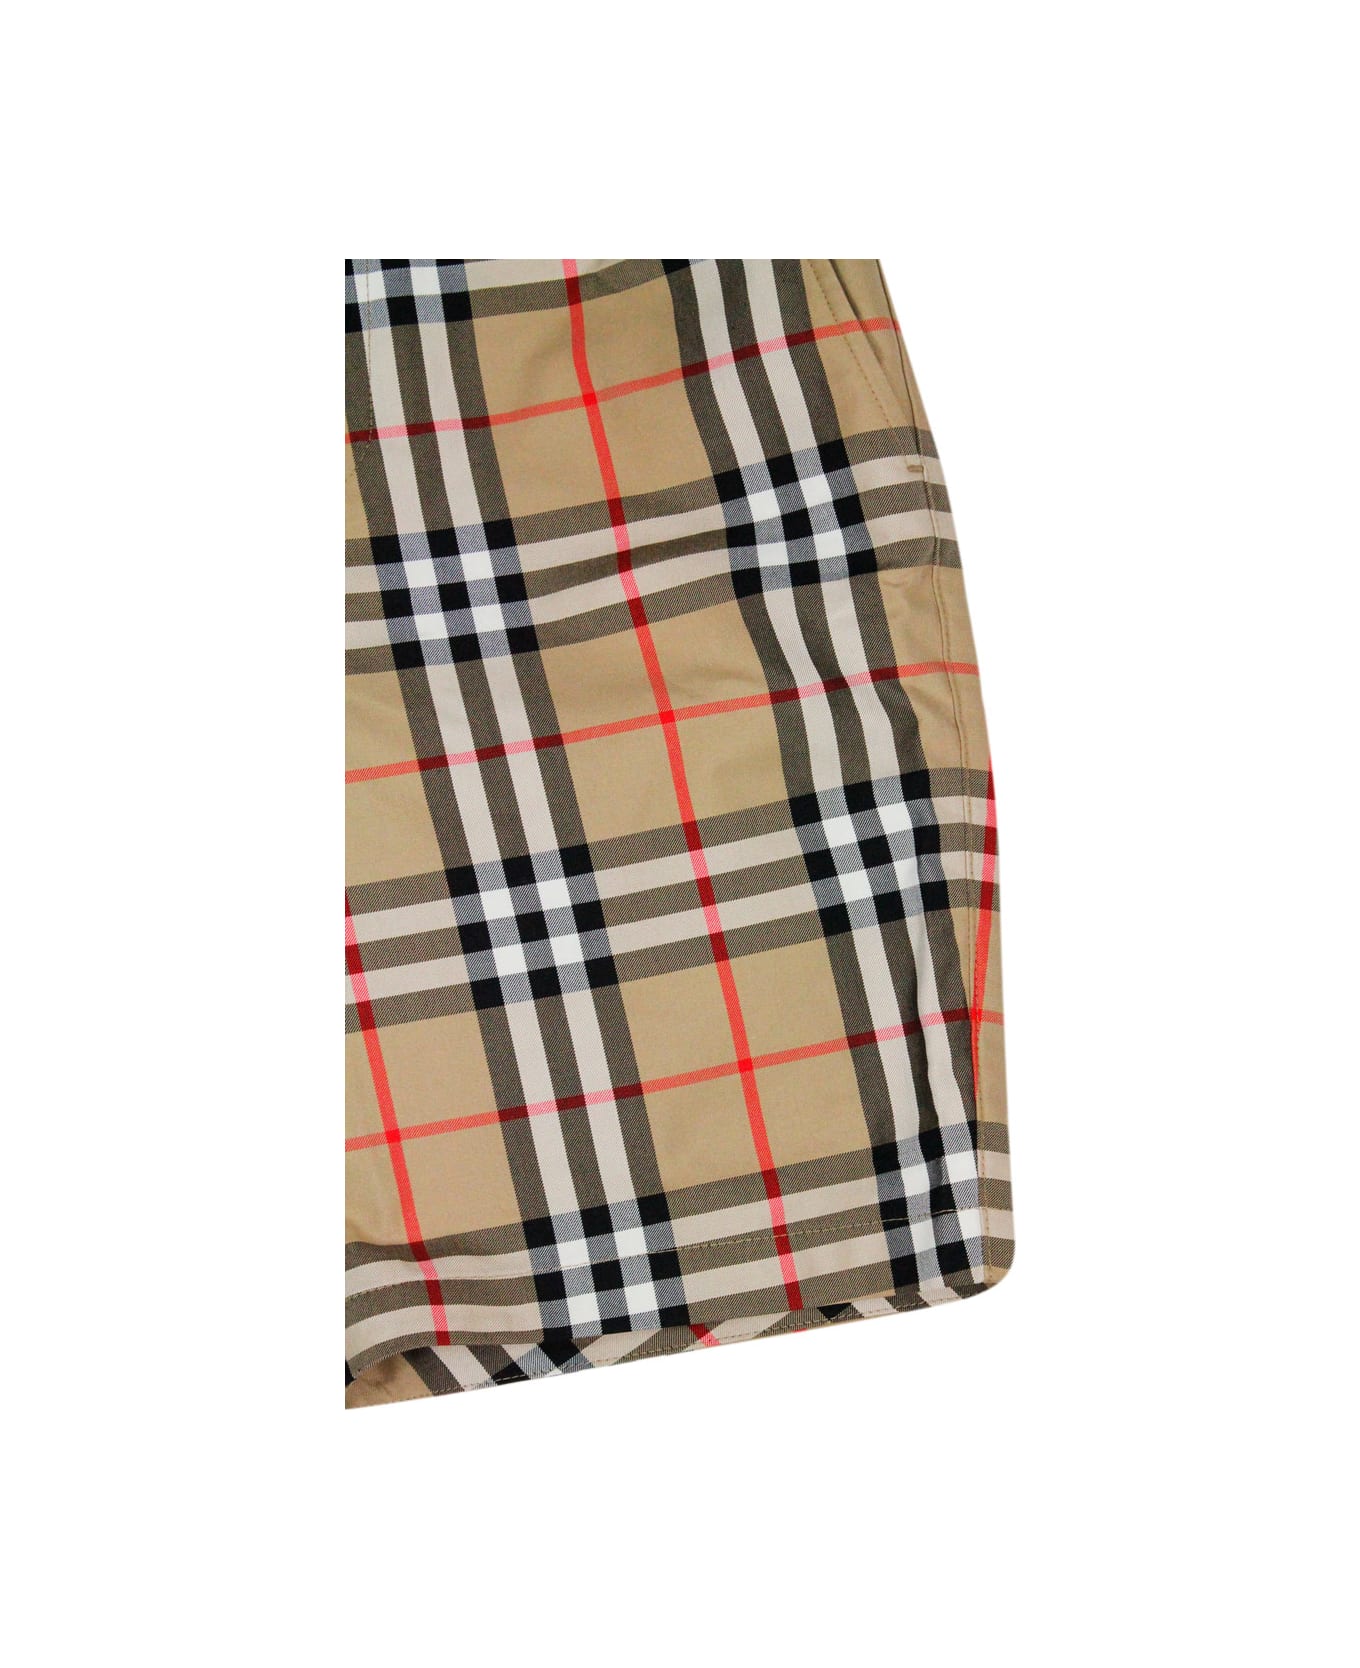 Burberry Cotton Shorts With Check Pattern And Hook And Zip Closure - Beige ボトムス